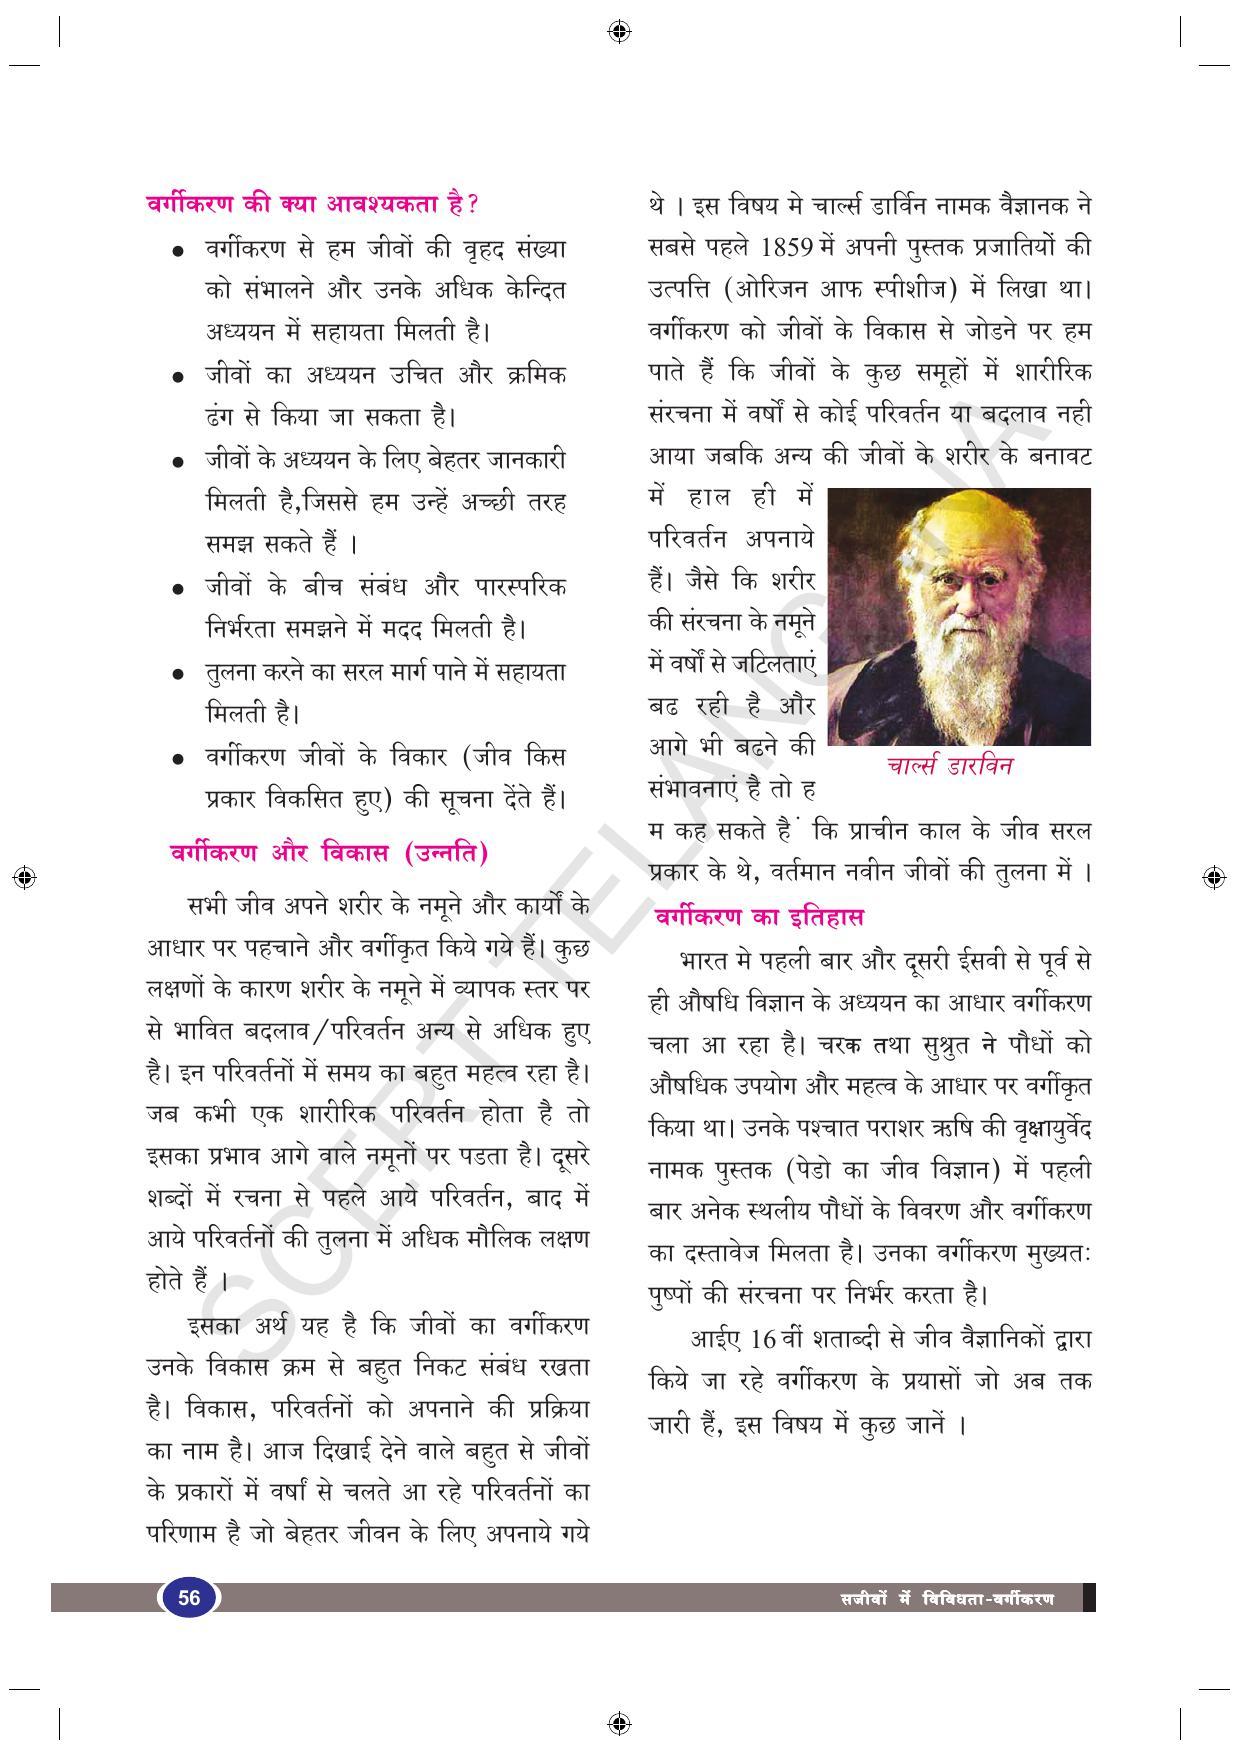 TS SCERT Class 9 Biological Science (Hindi Medium) Text Book - Page 68